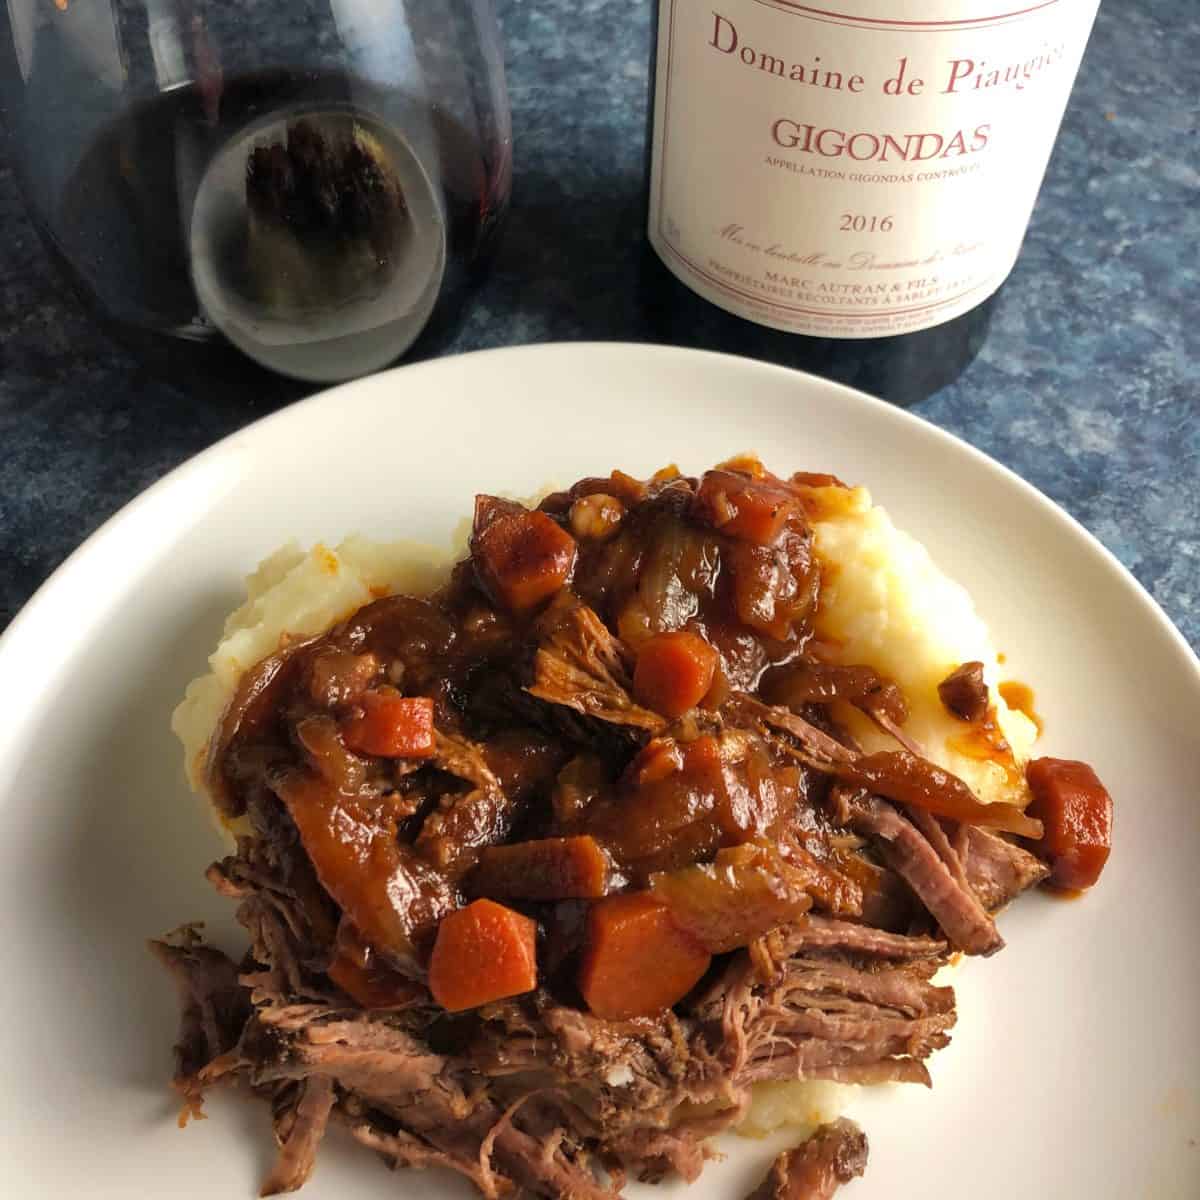 beef brisket served over mashed potatoes, along with a red wine.